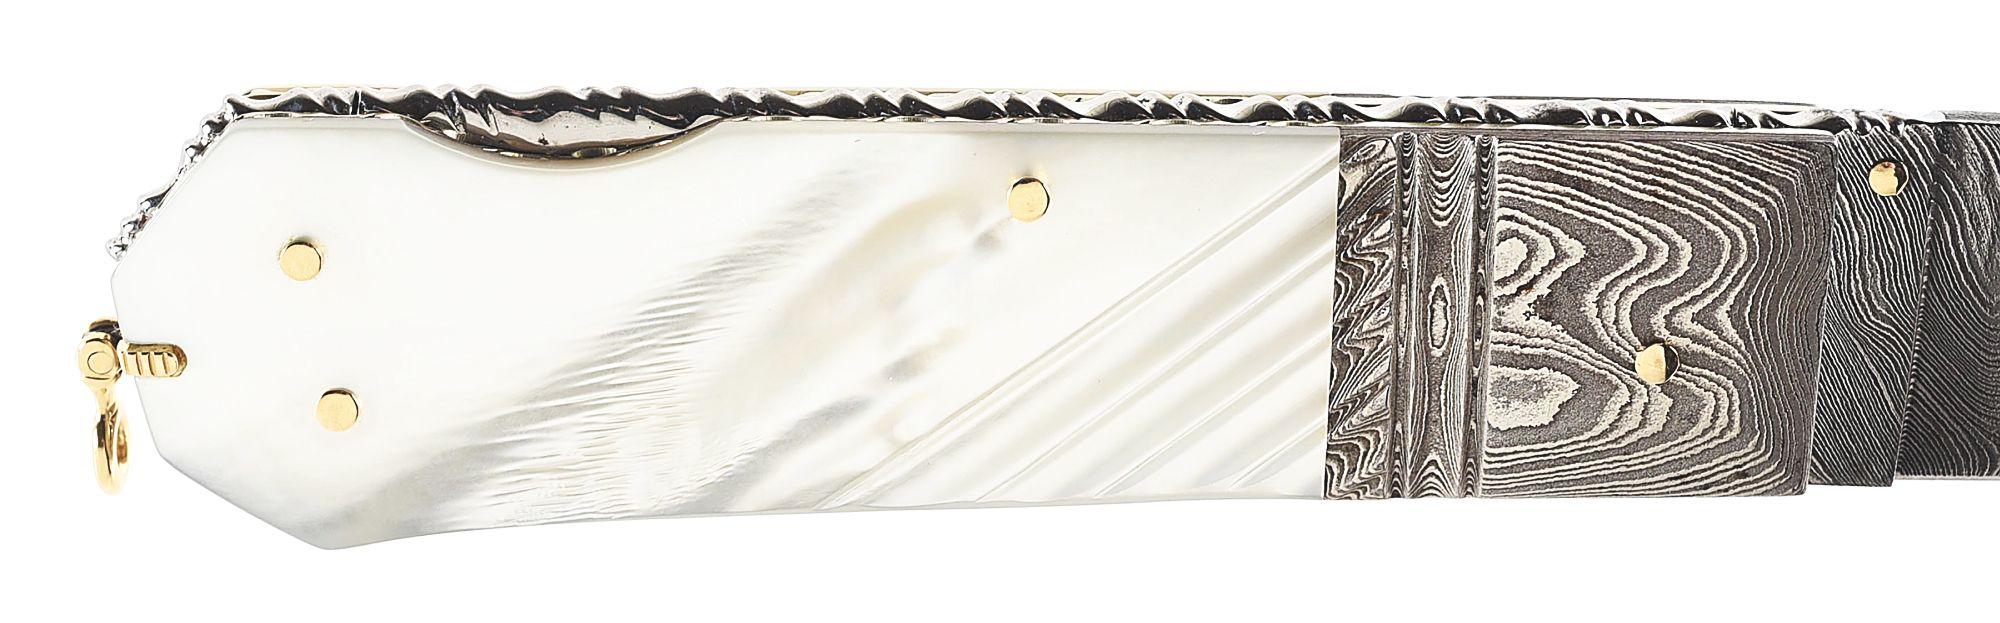 BARRY DAVIS 6" FOLDER WITH MOTHER OF PEARL HANDLE.